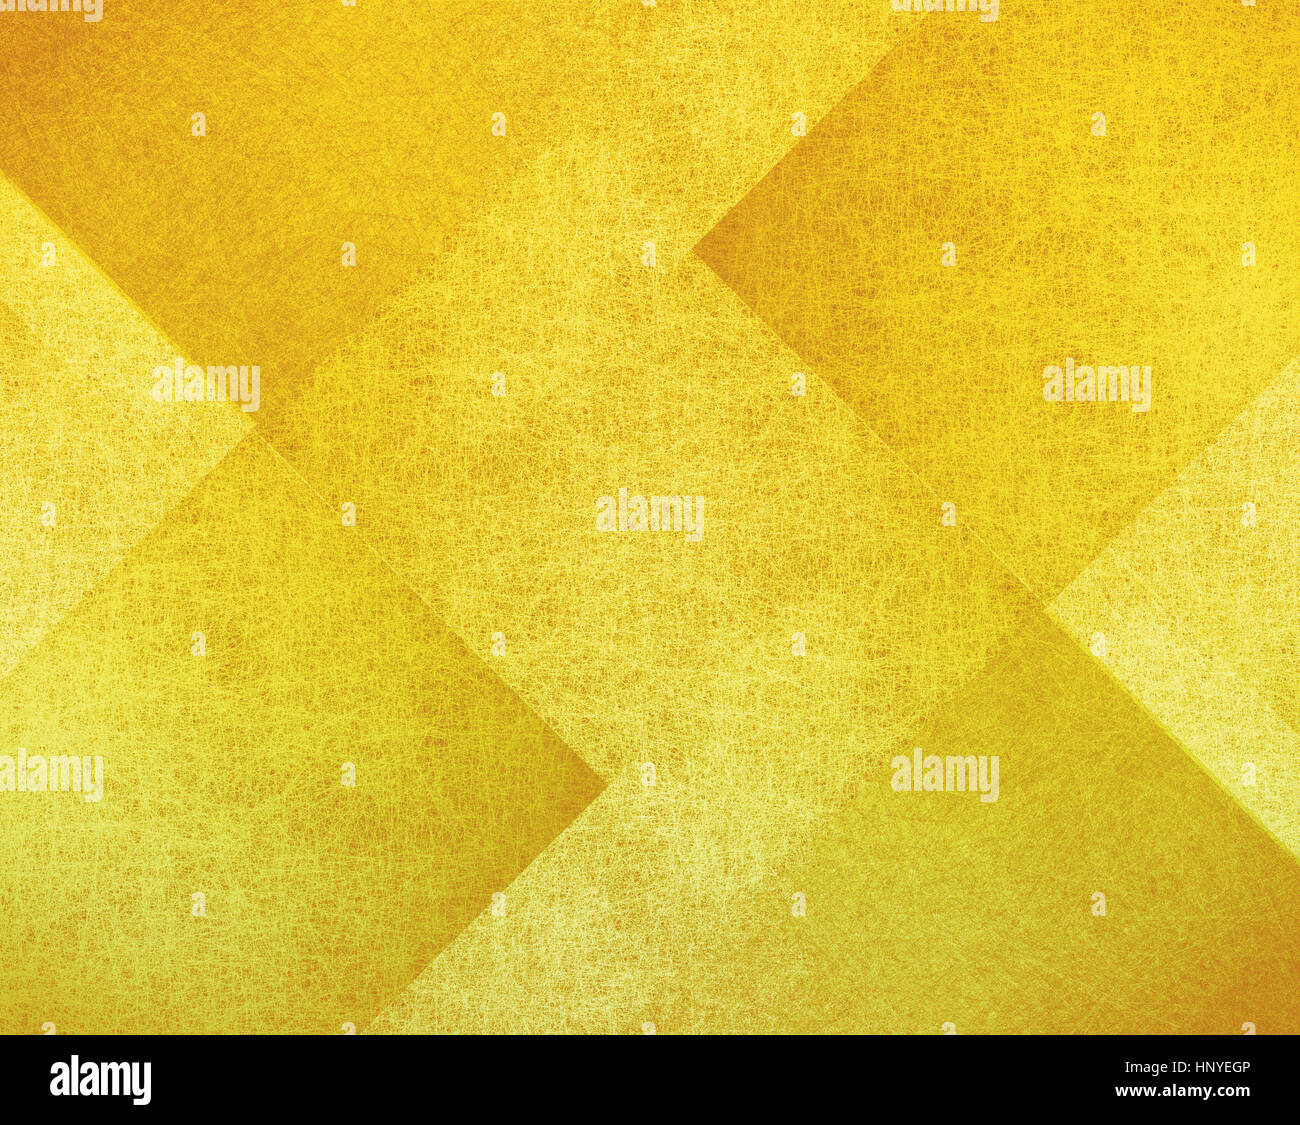 gold background with old parchment grunge texture in modern art abstract background block layout design, yellow paper with block pattern Stock Photo